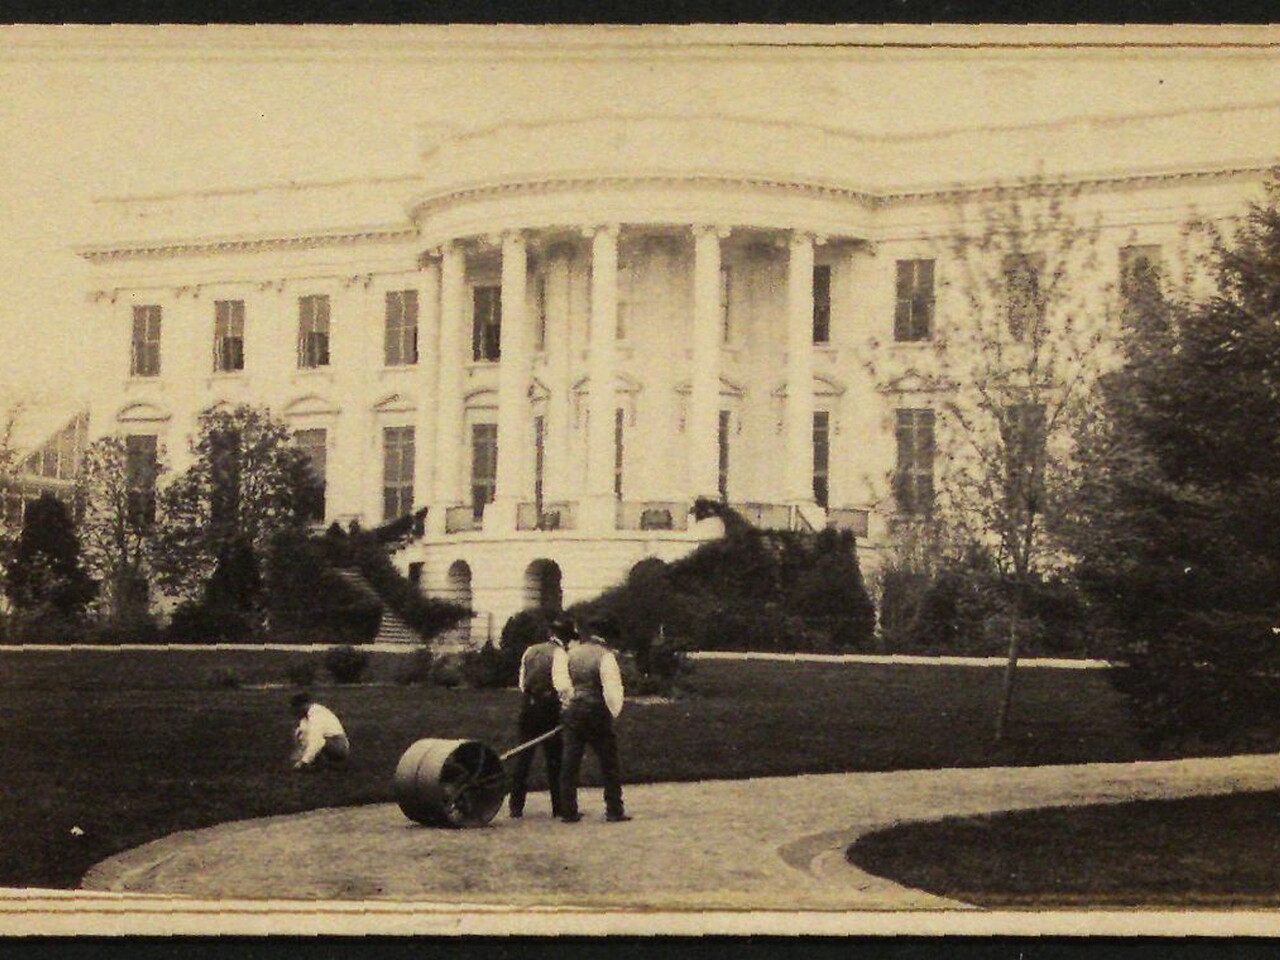 Front view of the White House